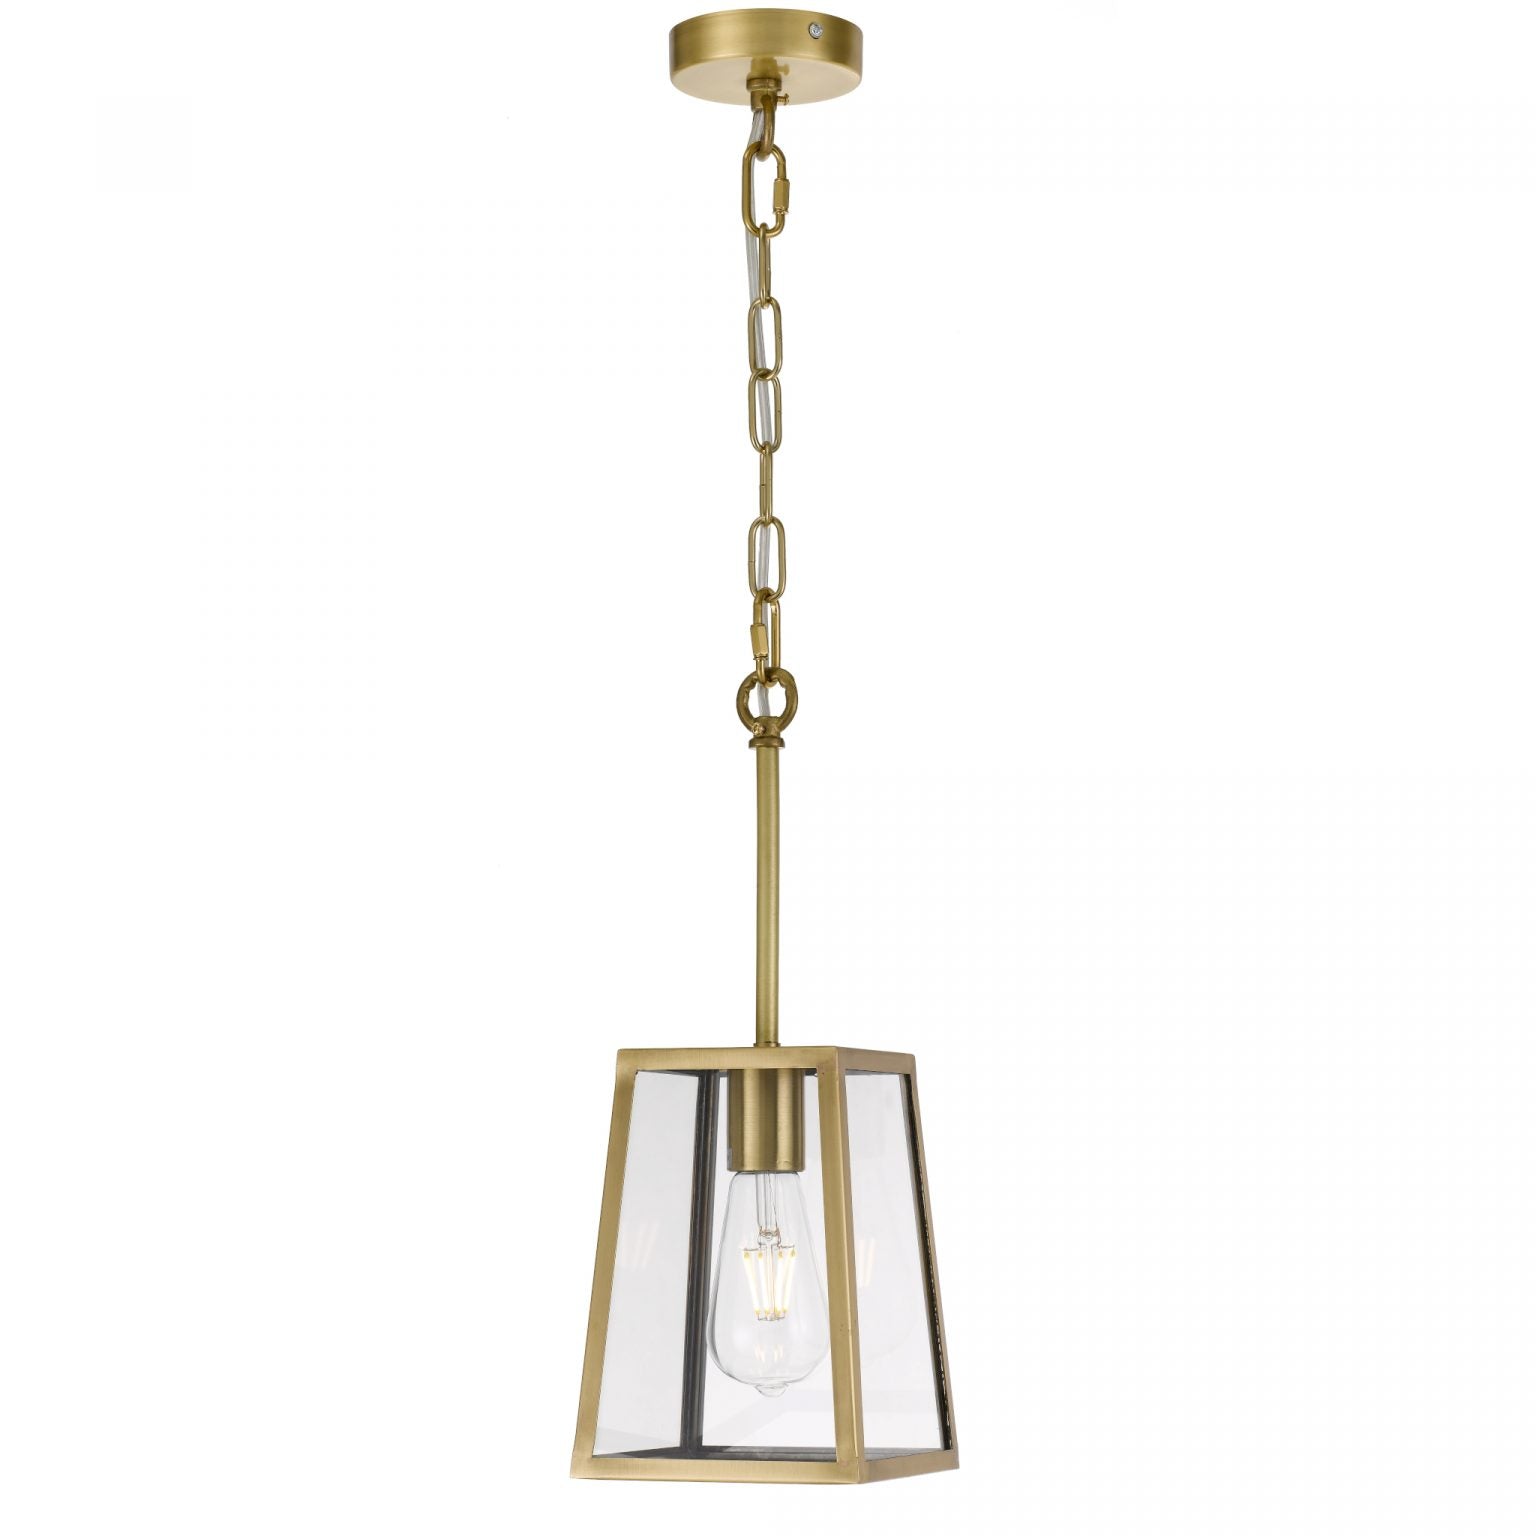 Cantena 15cm Pendant Antique Brass with Clear Glass Panel Lantern